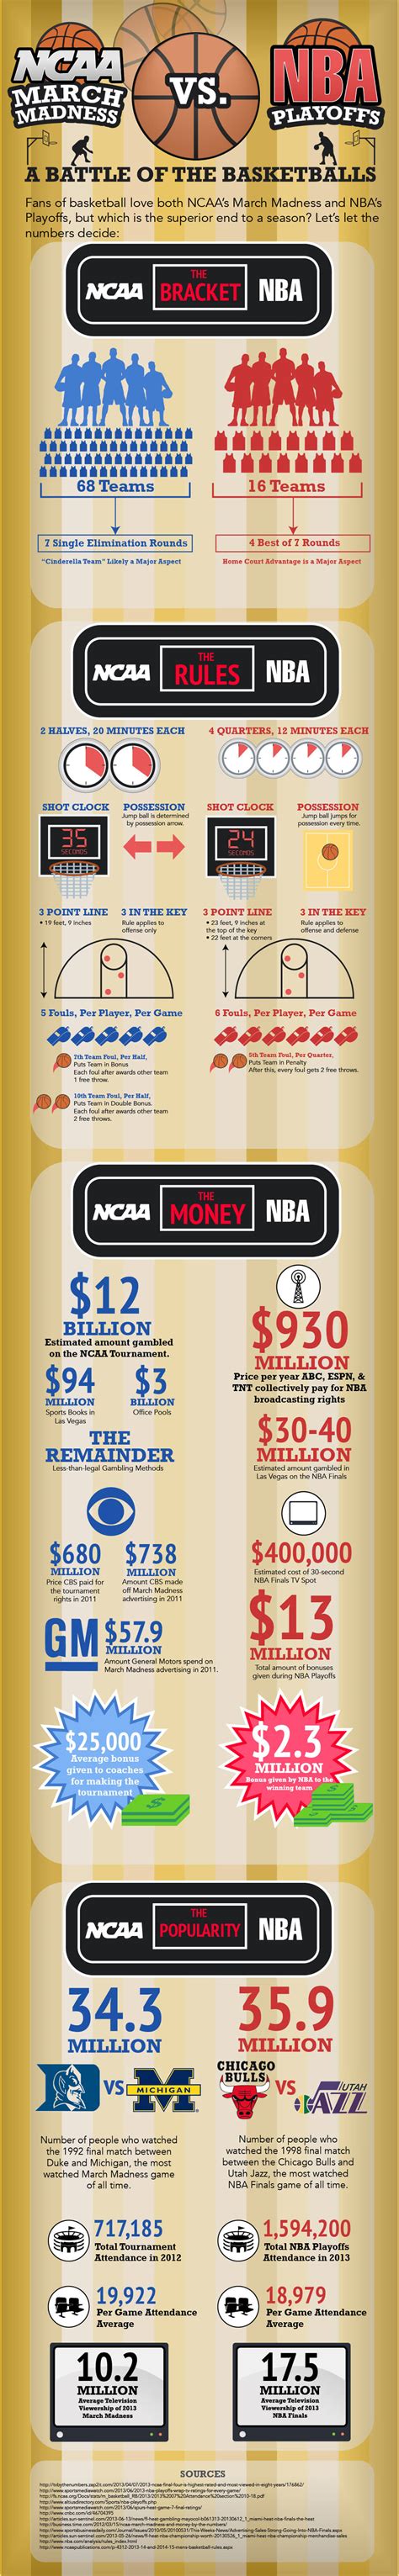 Infographic March Madness Vs Nba Finals